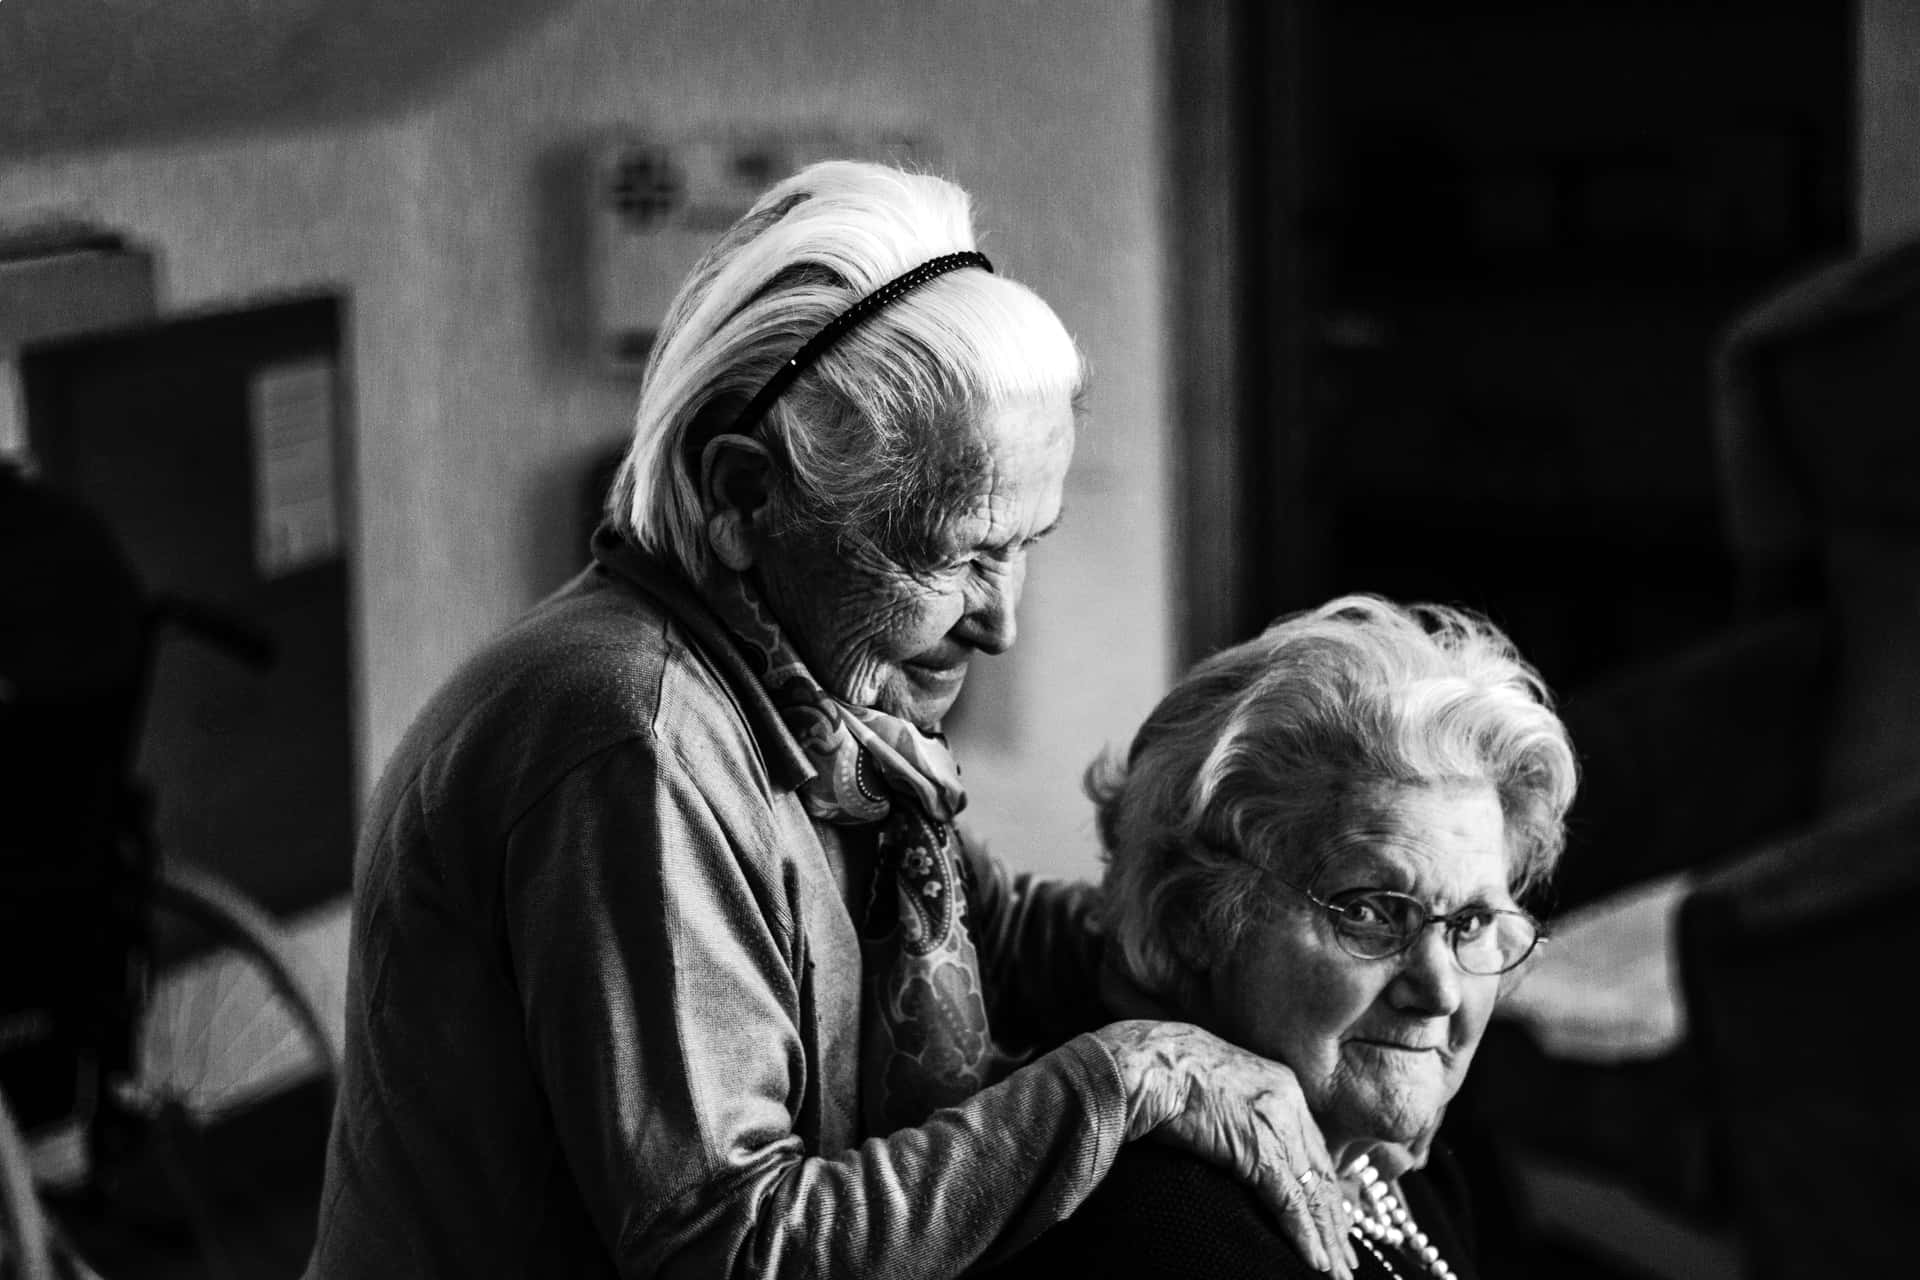 Two Mature Women Black And White